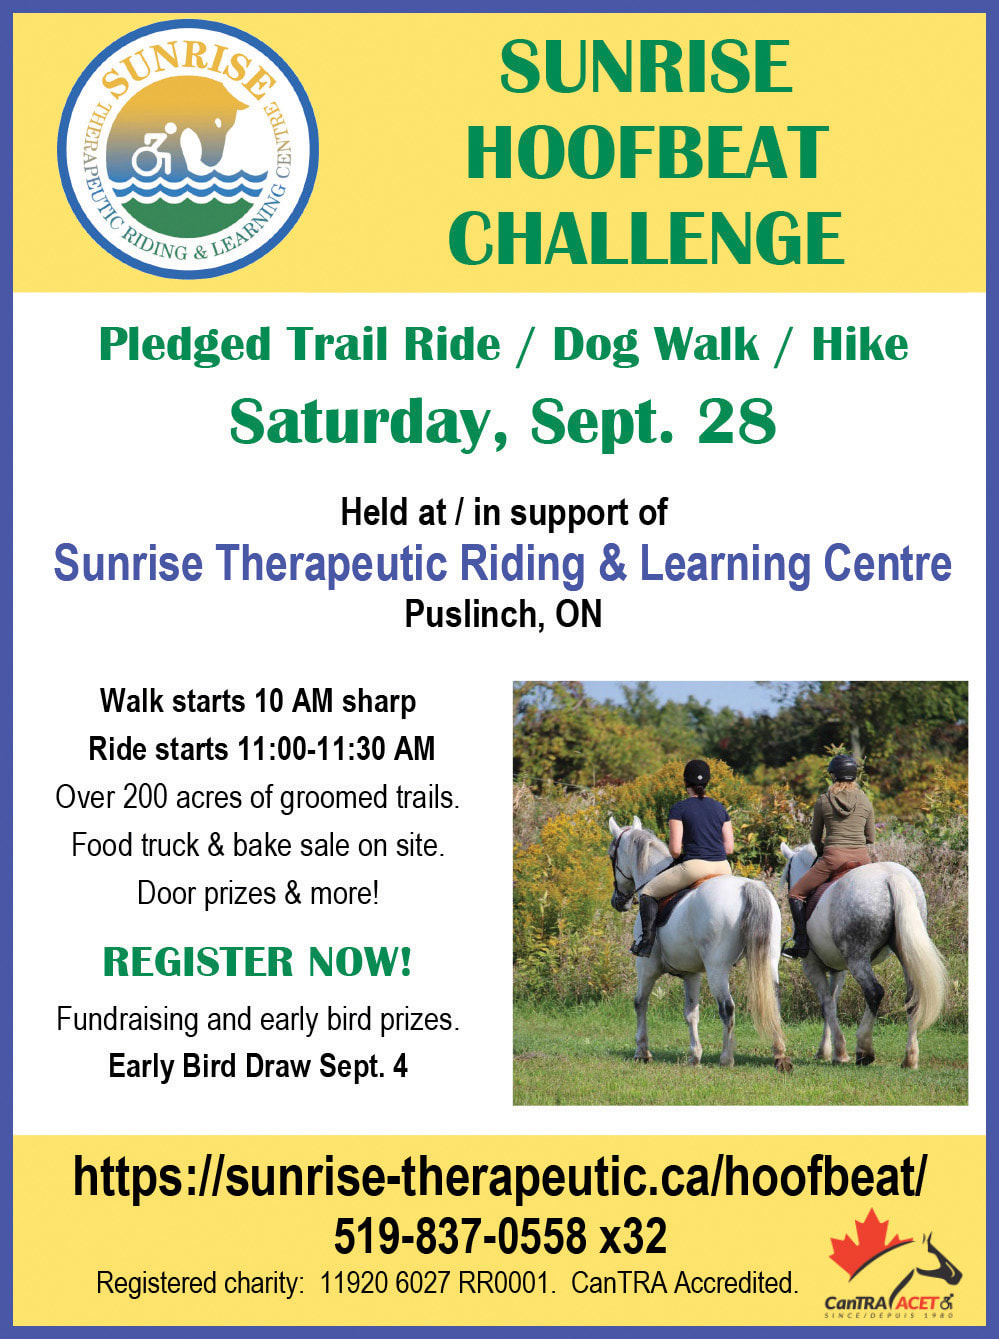 Sunrise Therapeutic Riding & Learning Centre